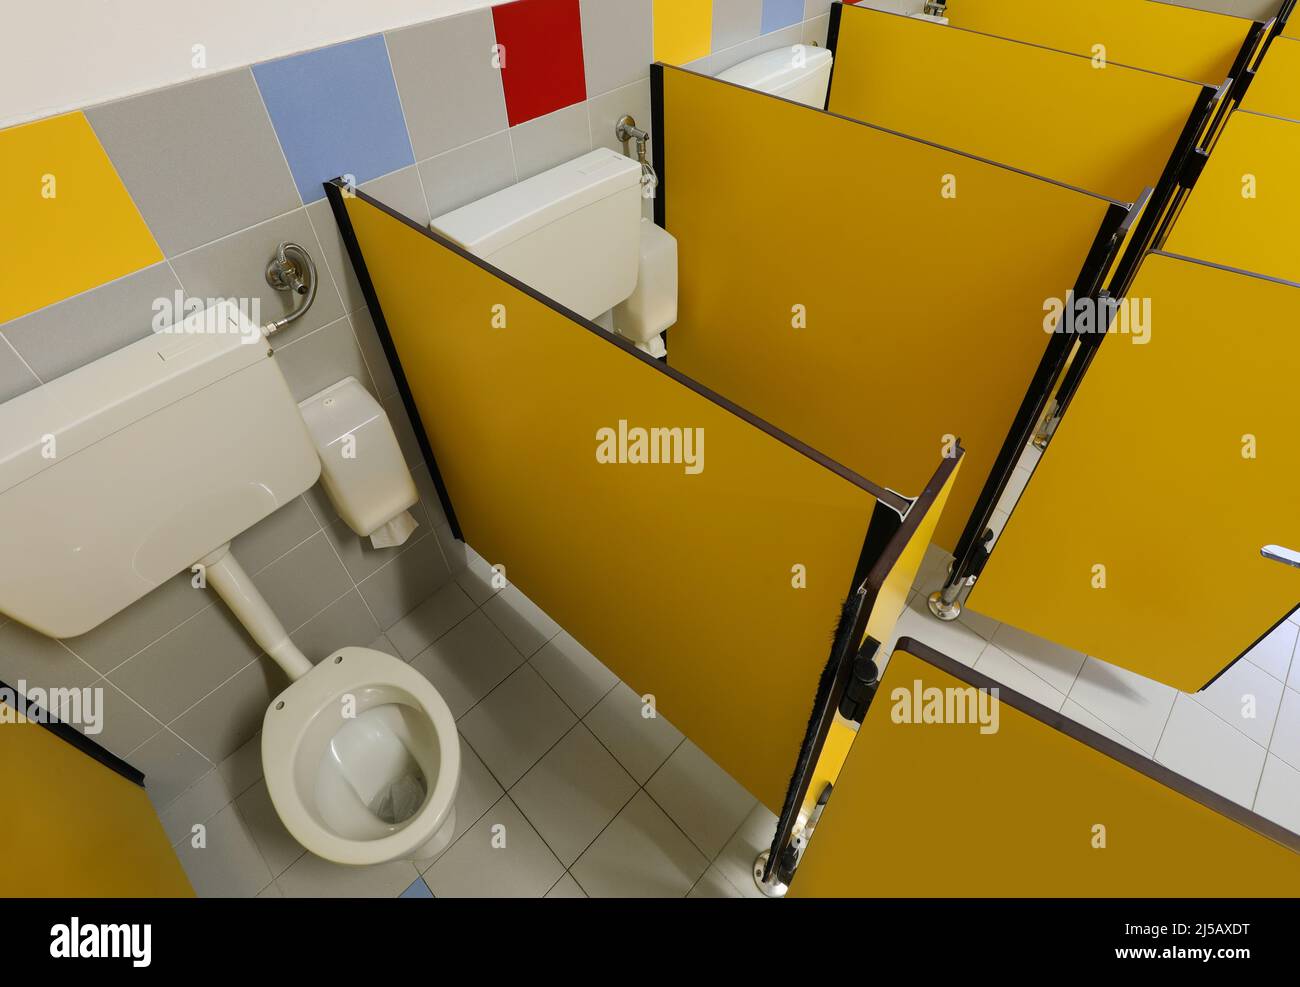 interior of the nursery school bathrooms with low ceramic toilets and yellow toilet cubicles without children Stock Photo